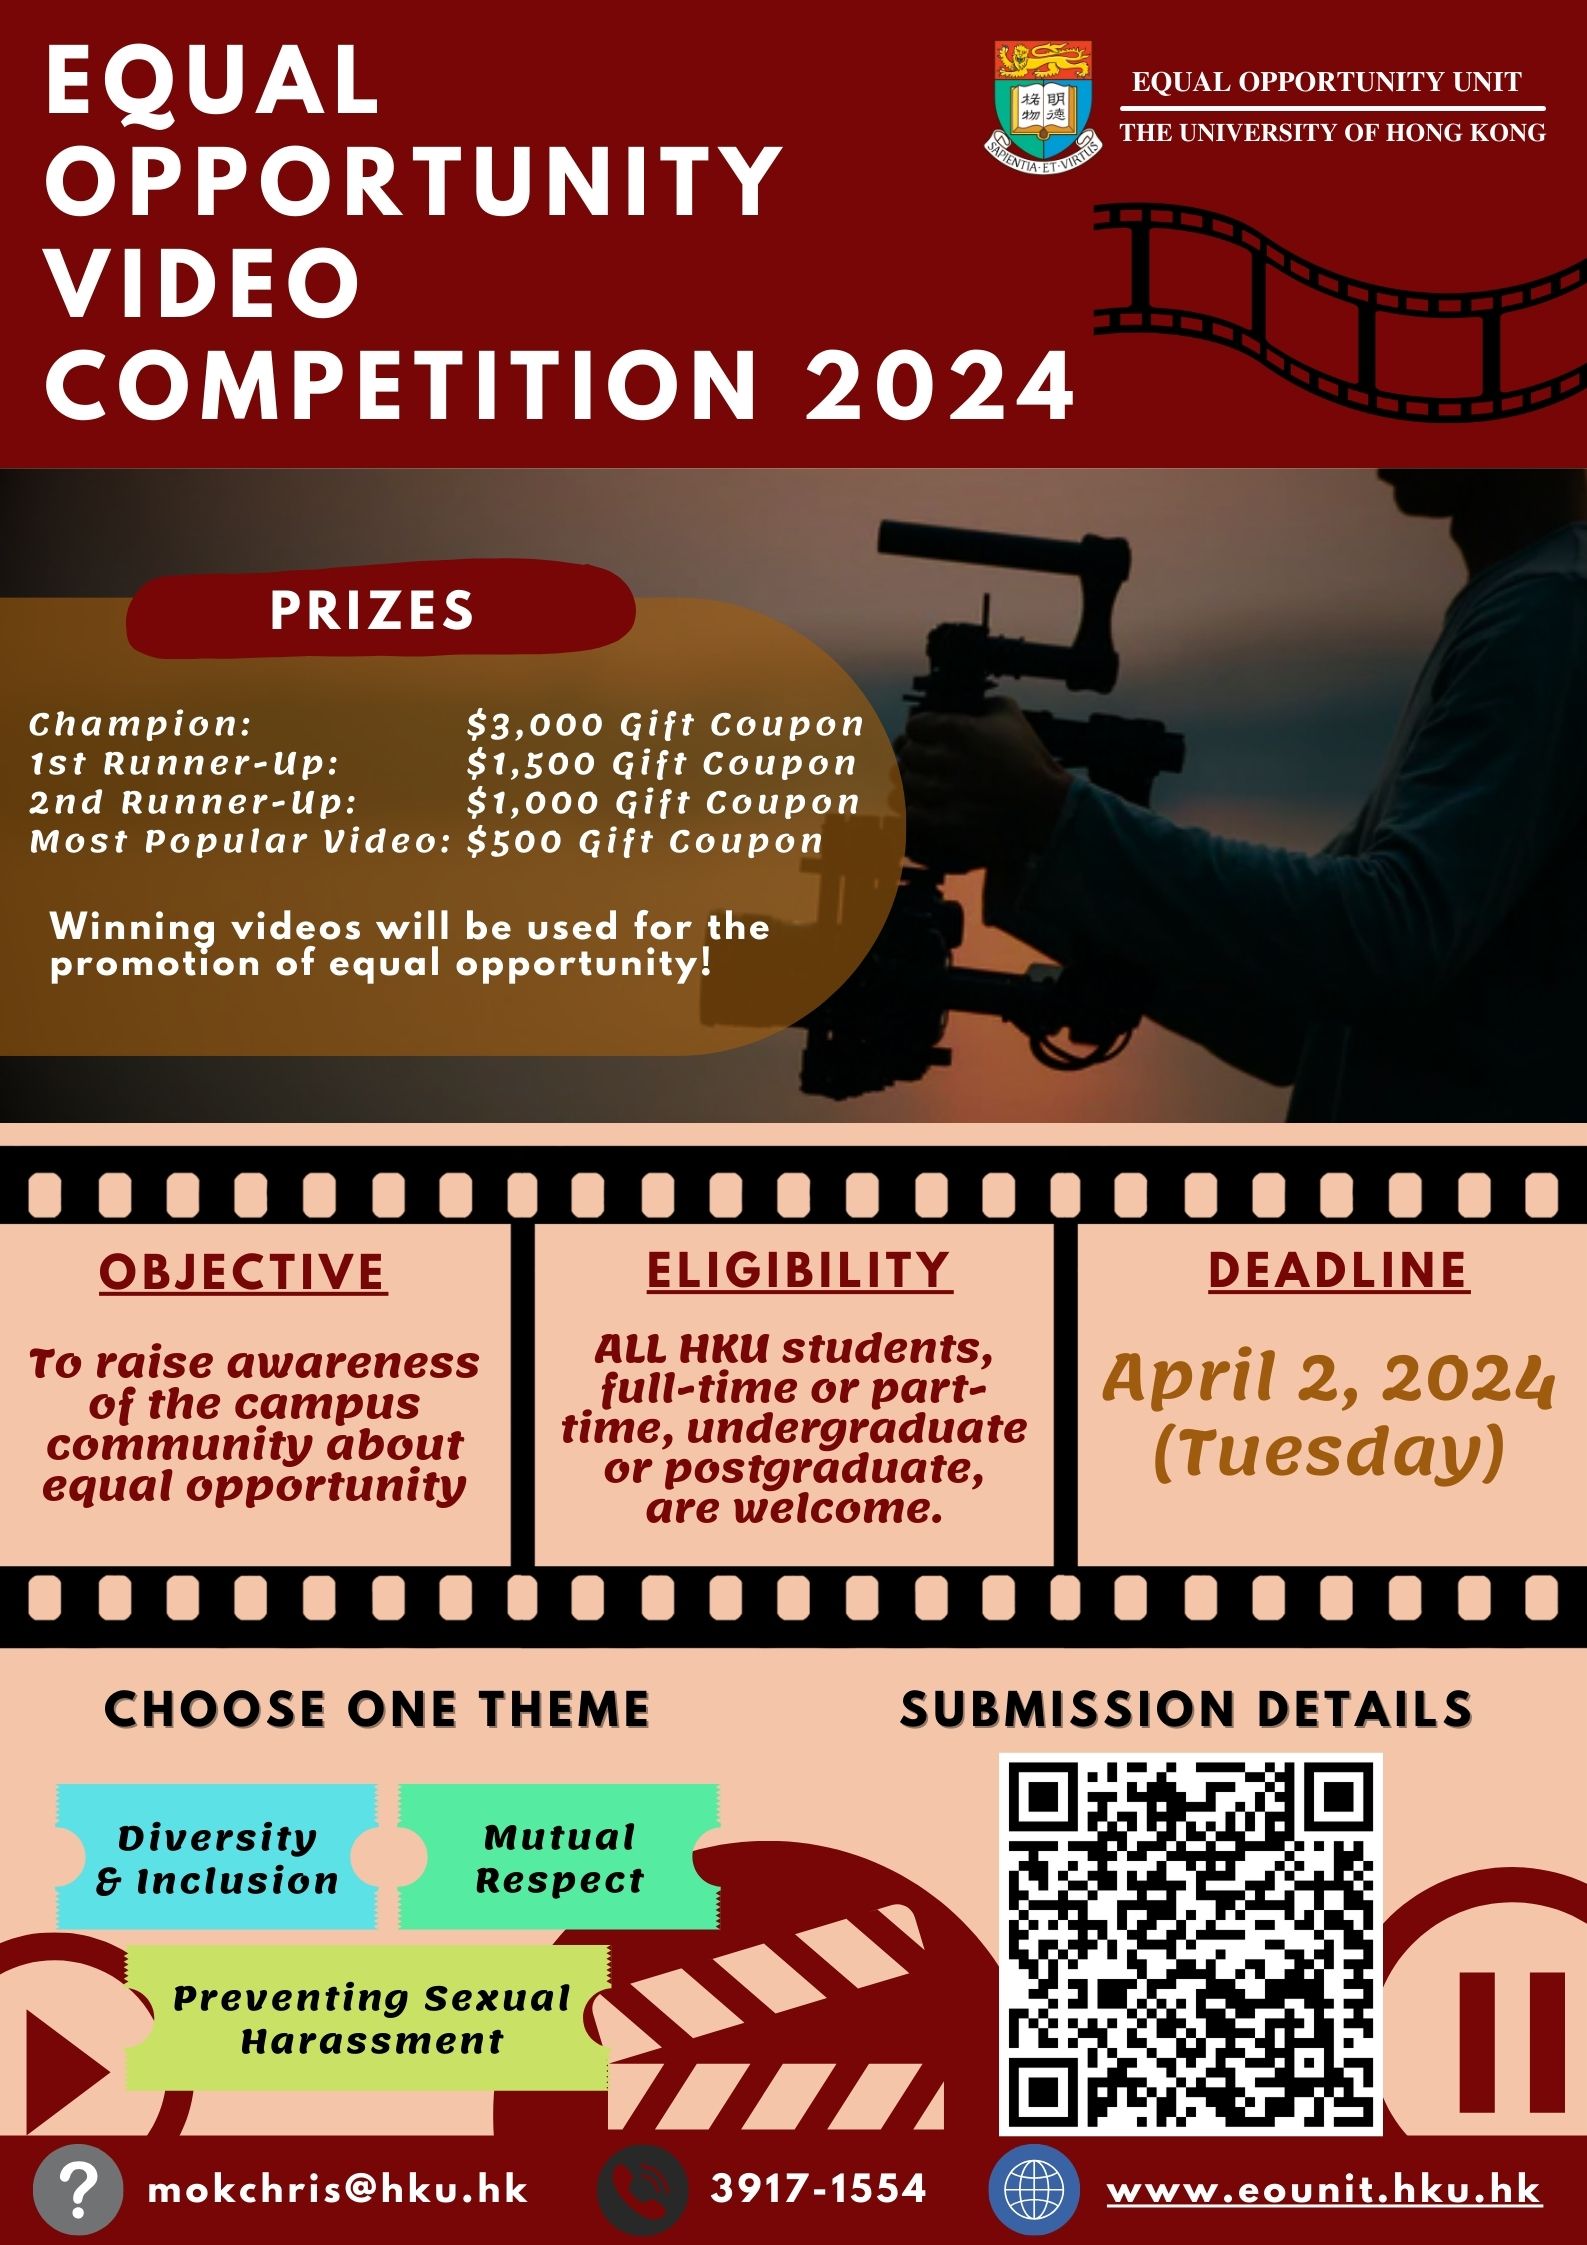 Equal Opportunity Video Competition 2024 Poster. Details same as content.